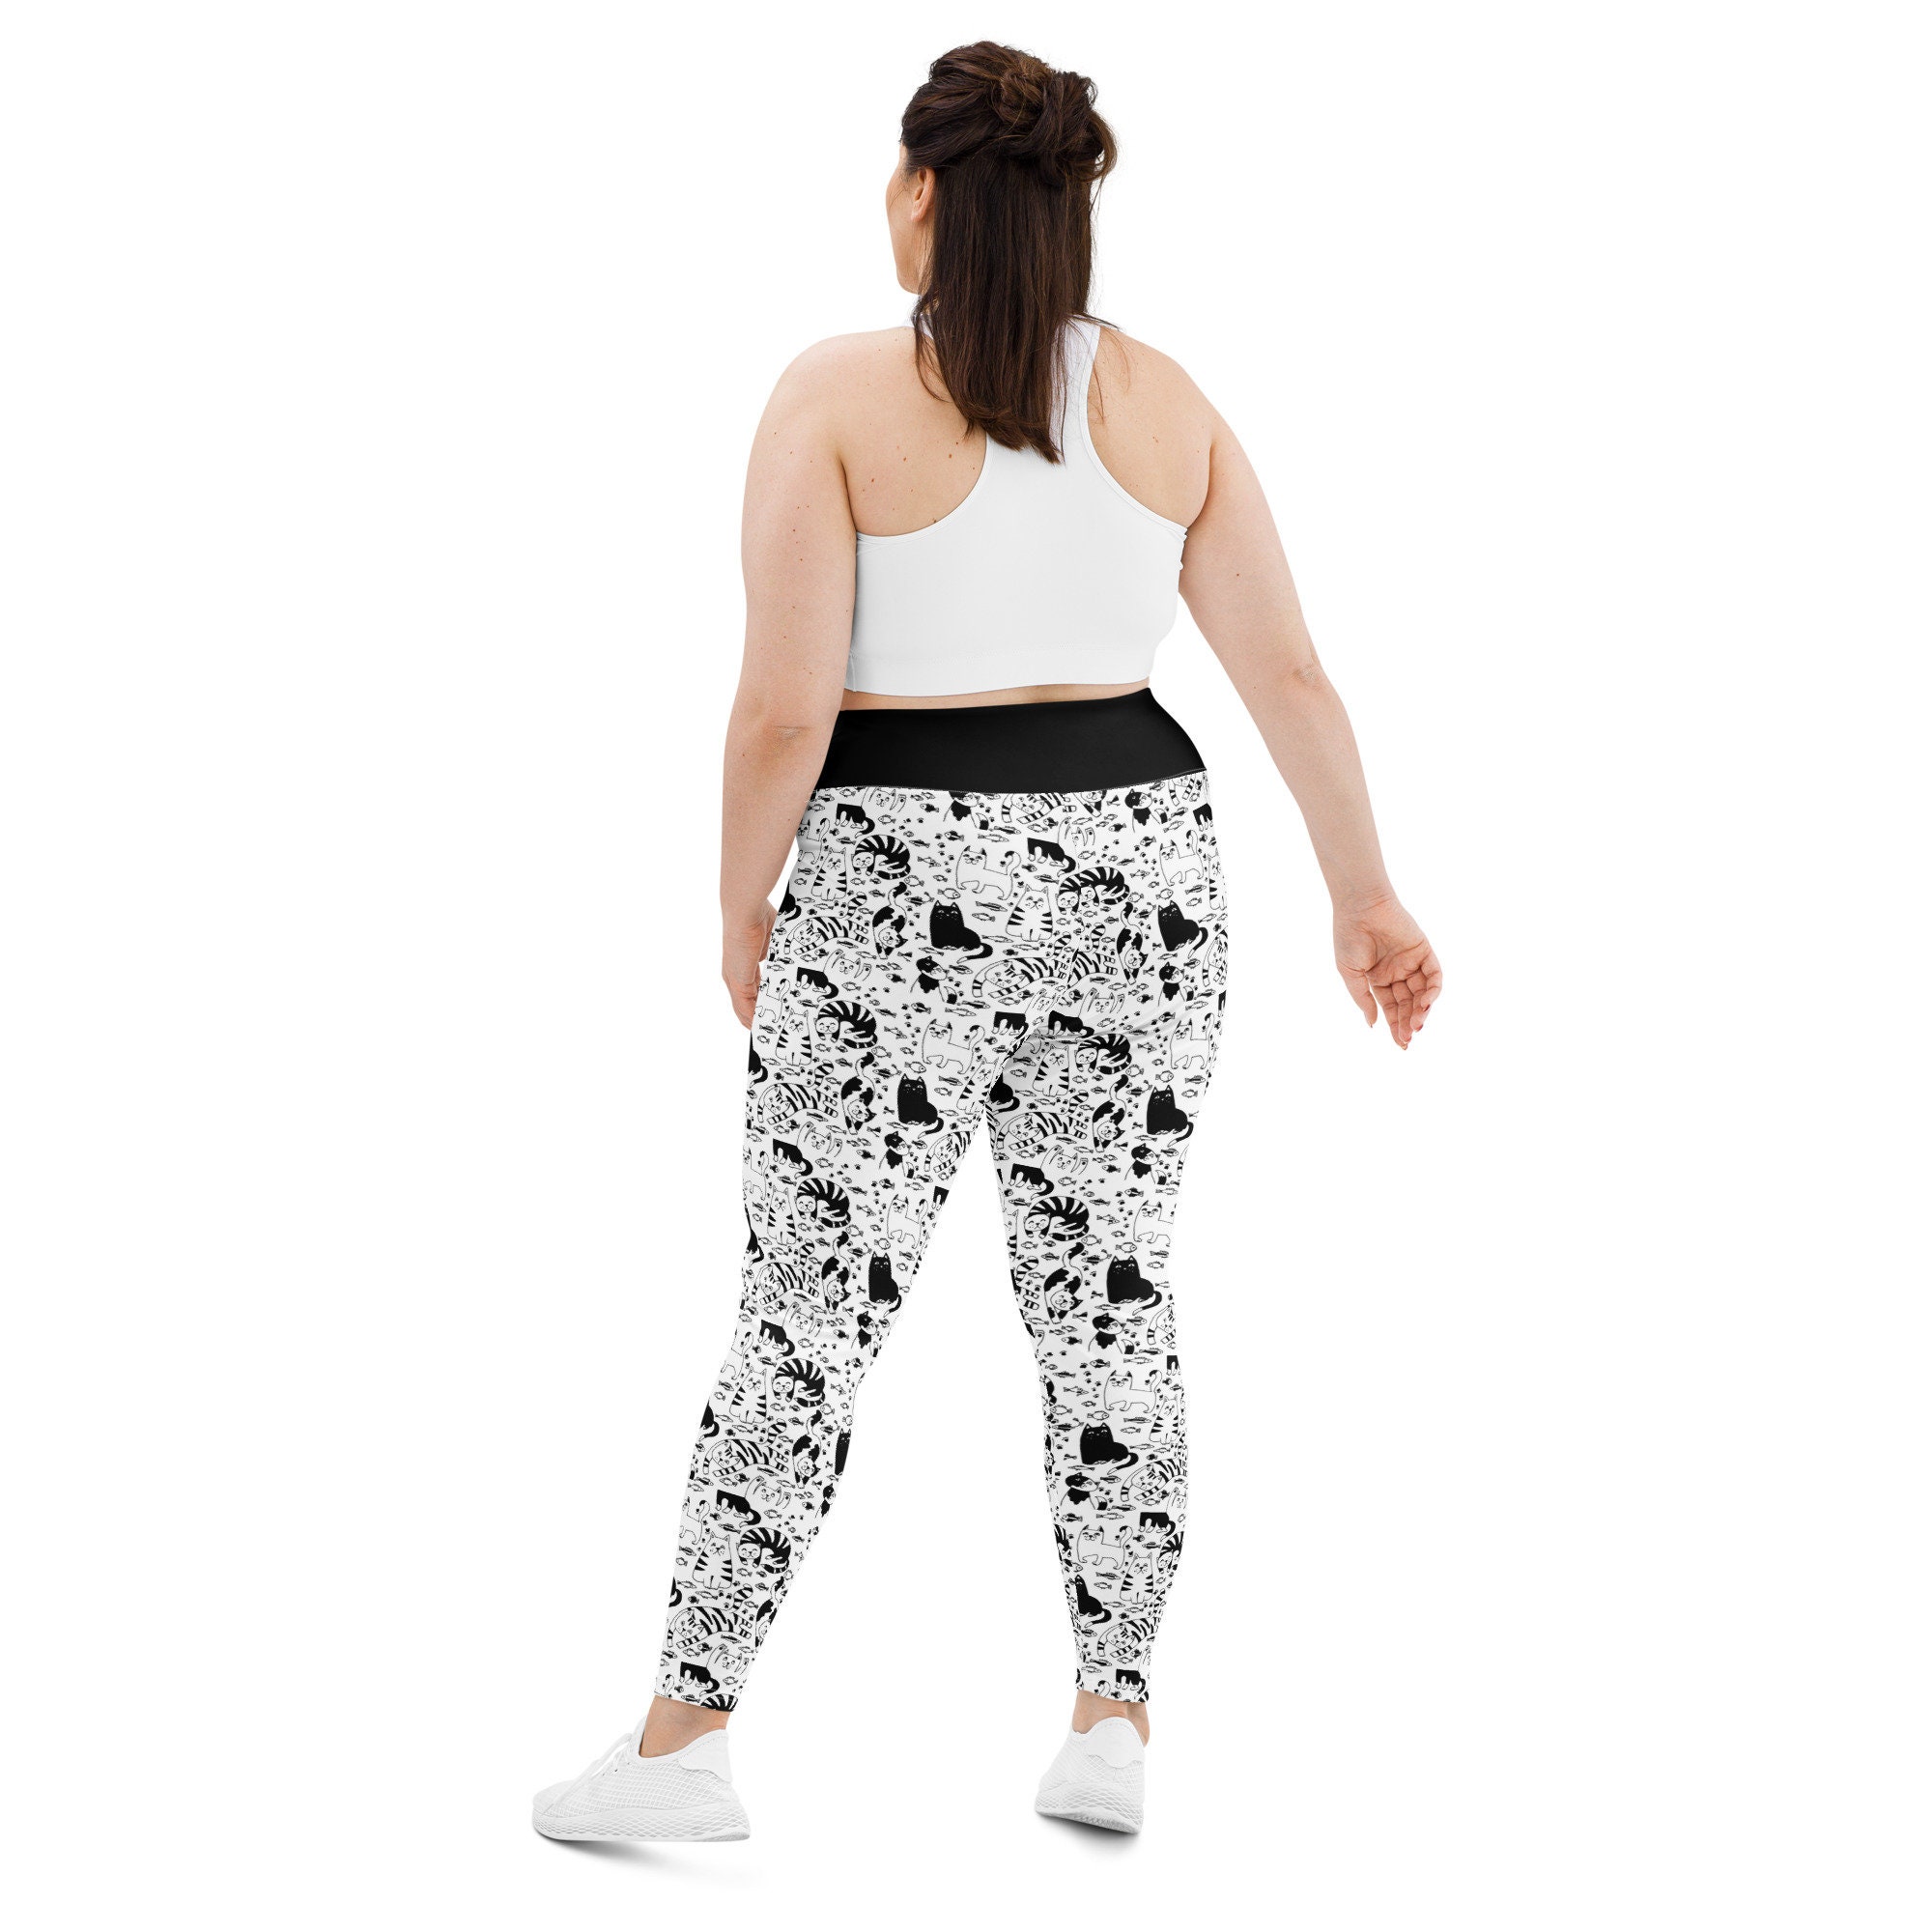 Crazy Cat Lady Stretch Funky Leggings. PLUS SIZE New